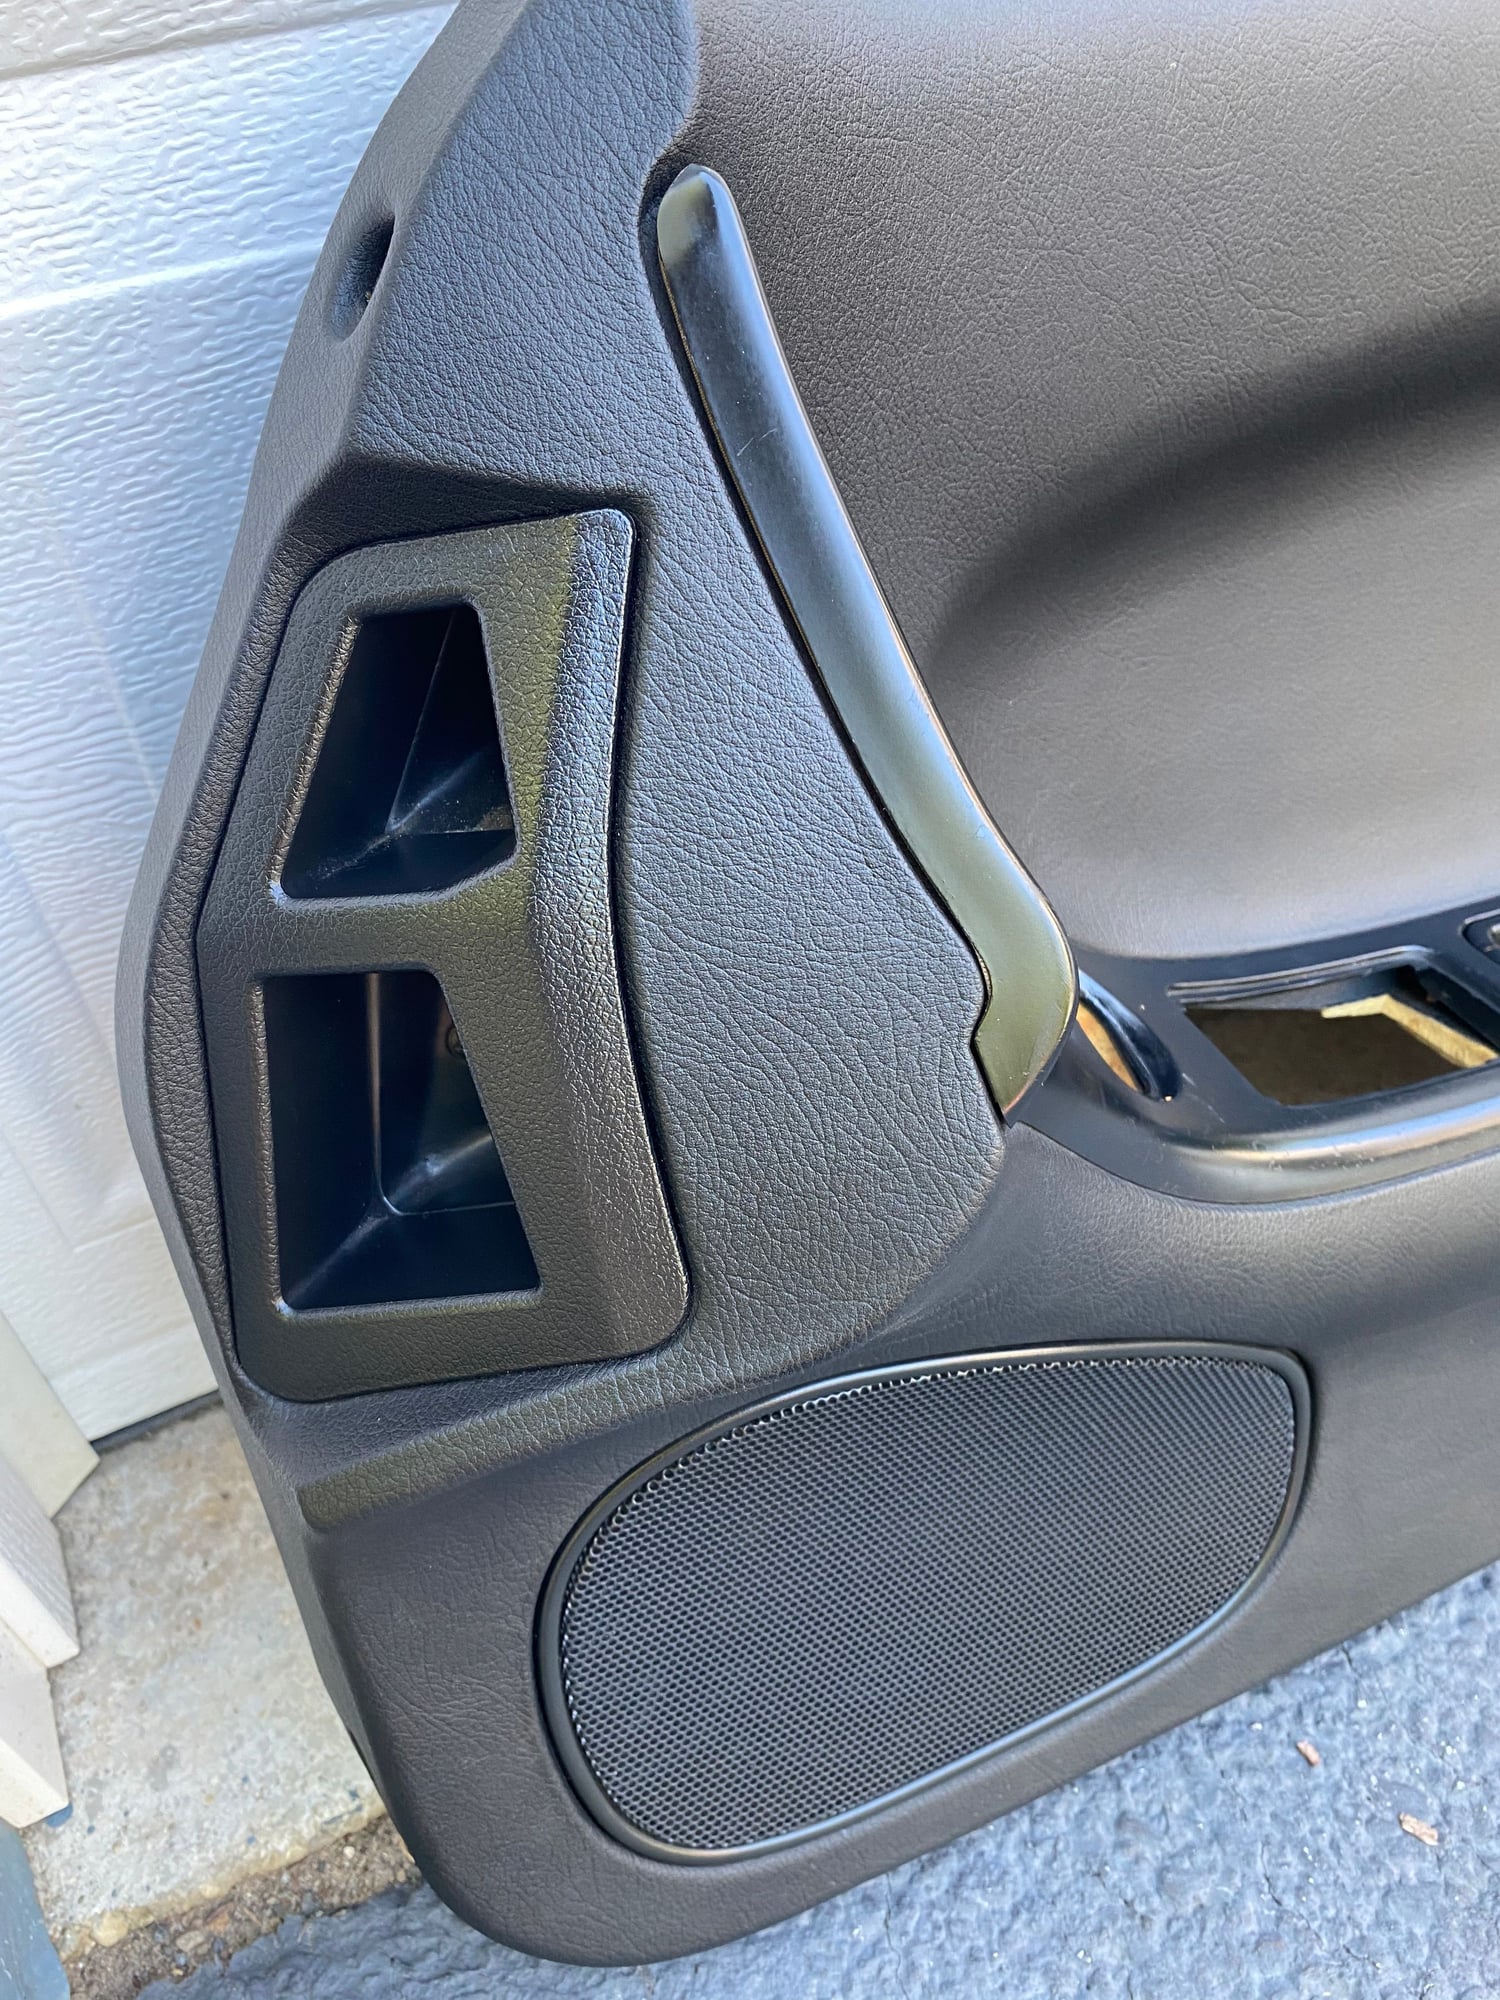 Interior/Upholstery - RHD RX-7 FD Door Panels! Excellent Shape! - Used - 1992 to 2002 Mazda RX-7 - Prince Frederick, MD 20678, United States